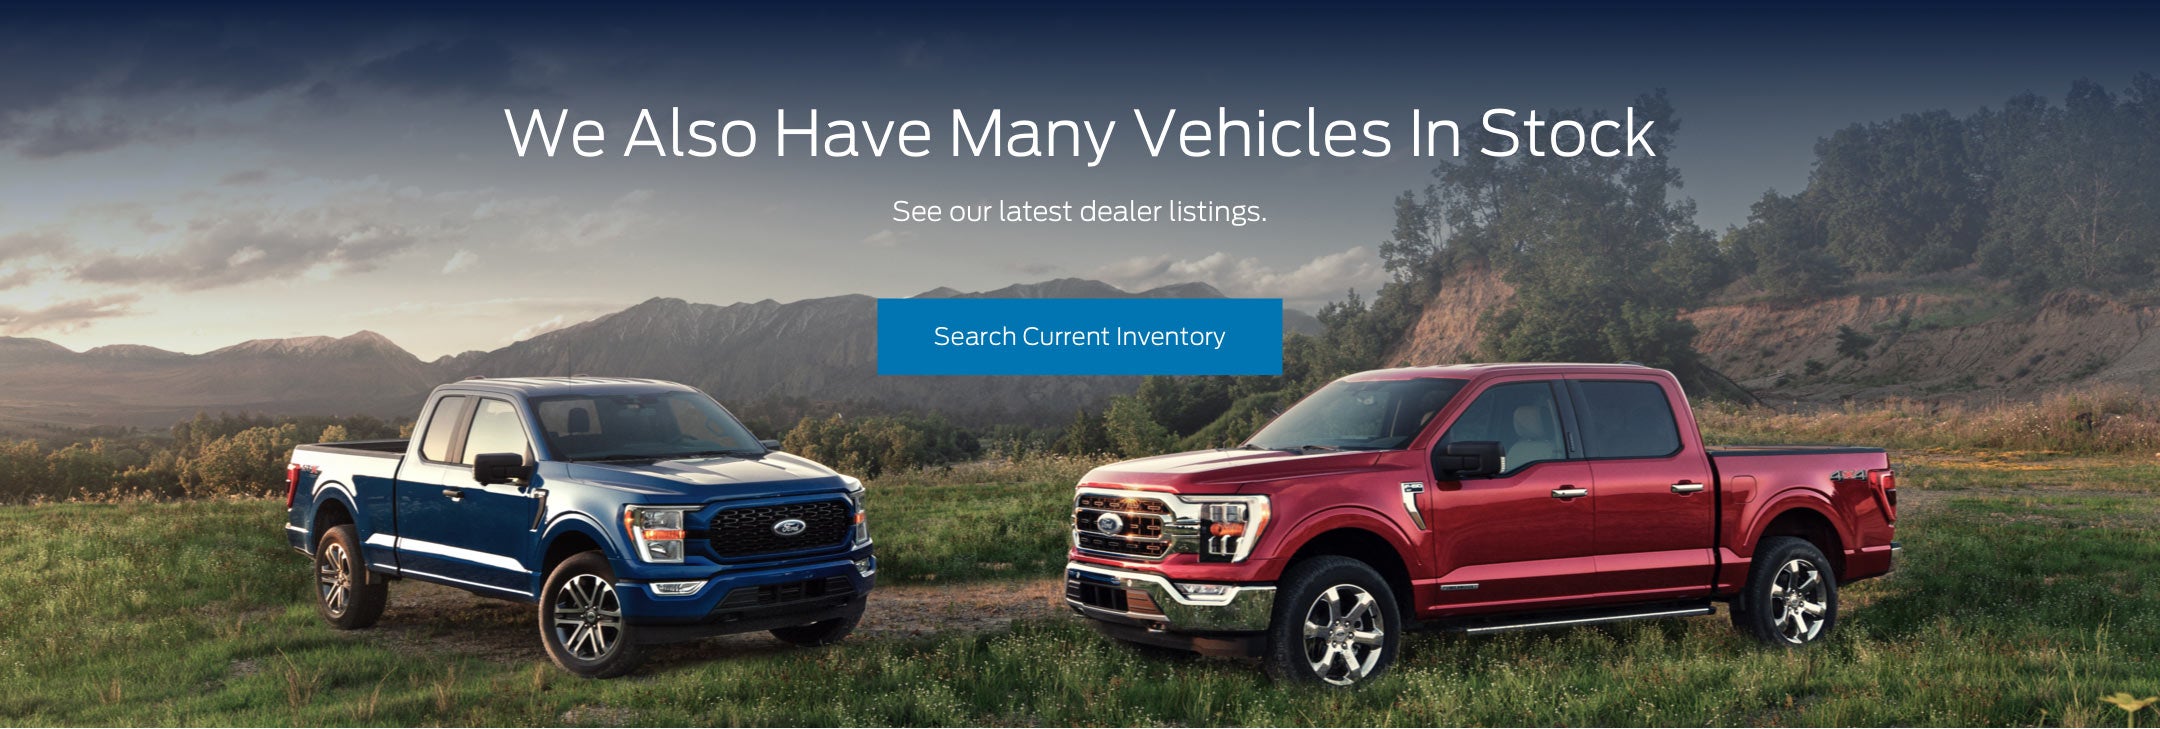 Ford vehicles in stock | DeMontrond Ford in Cleveland TX